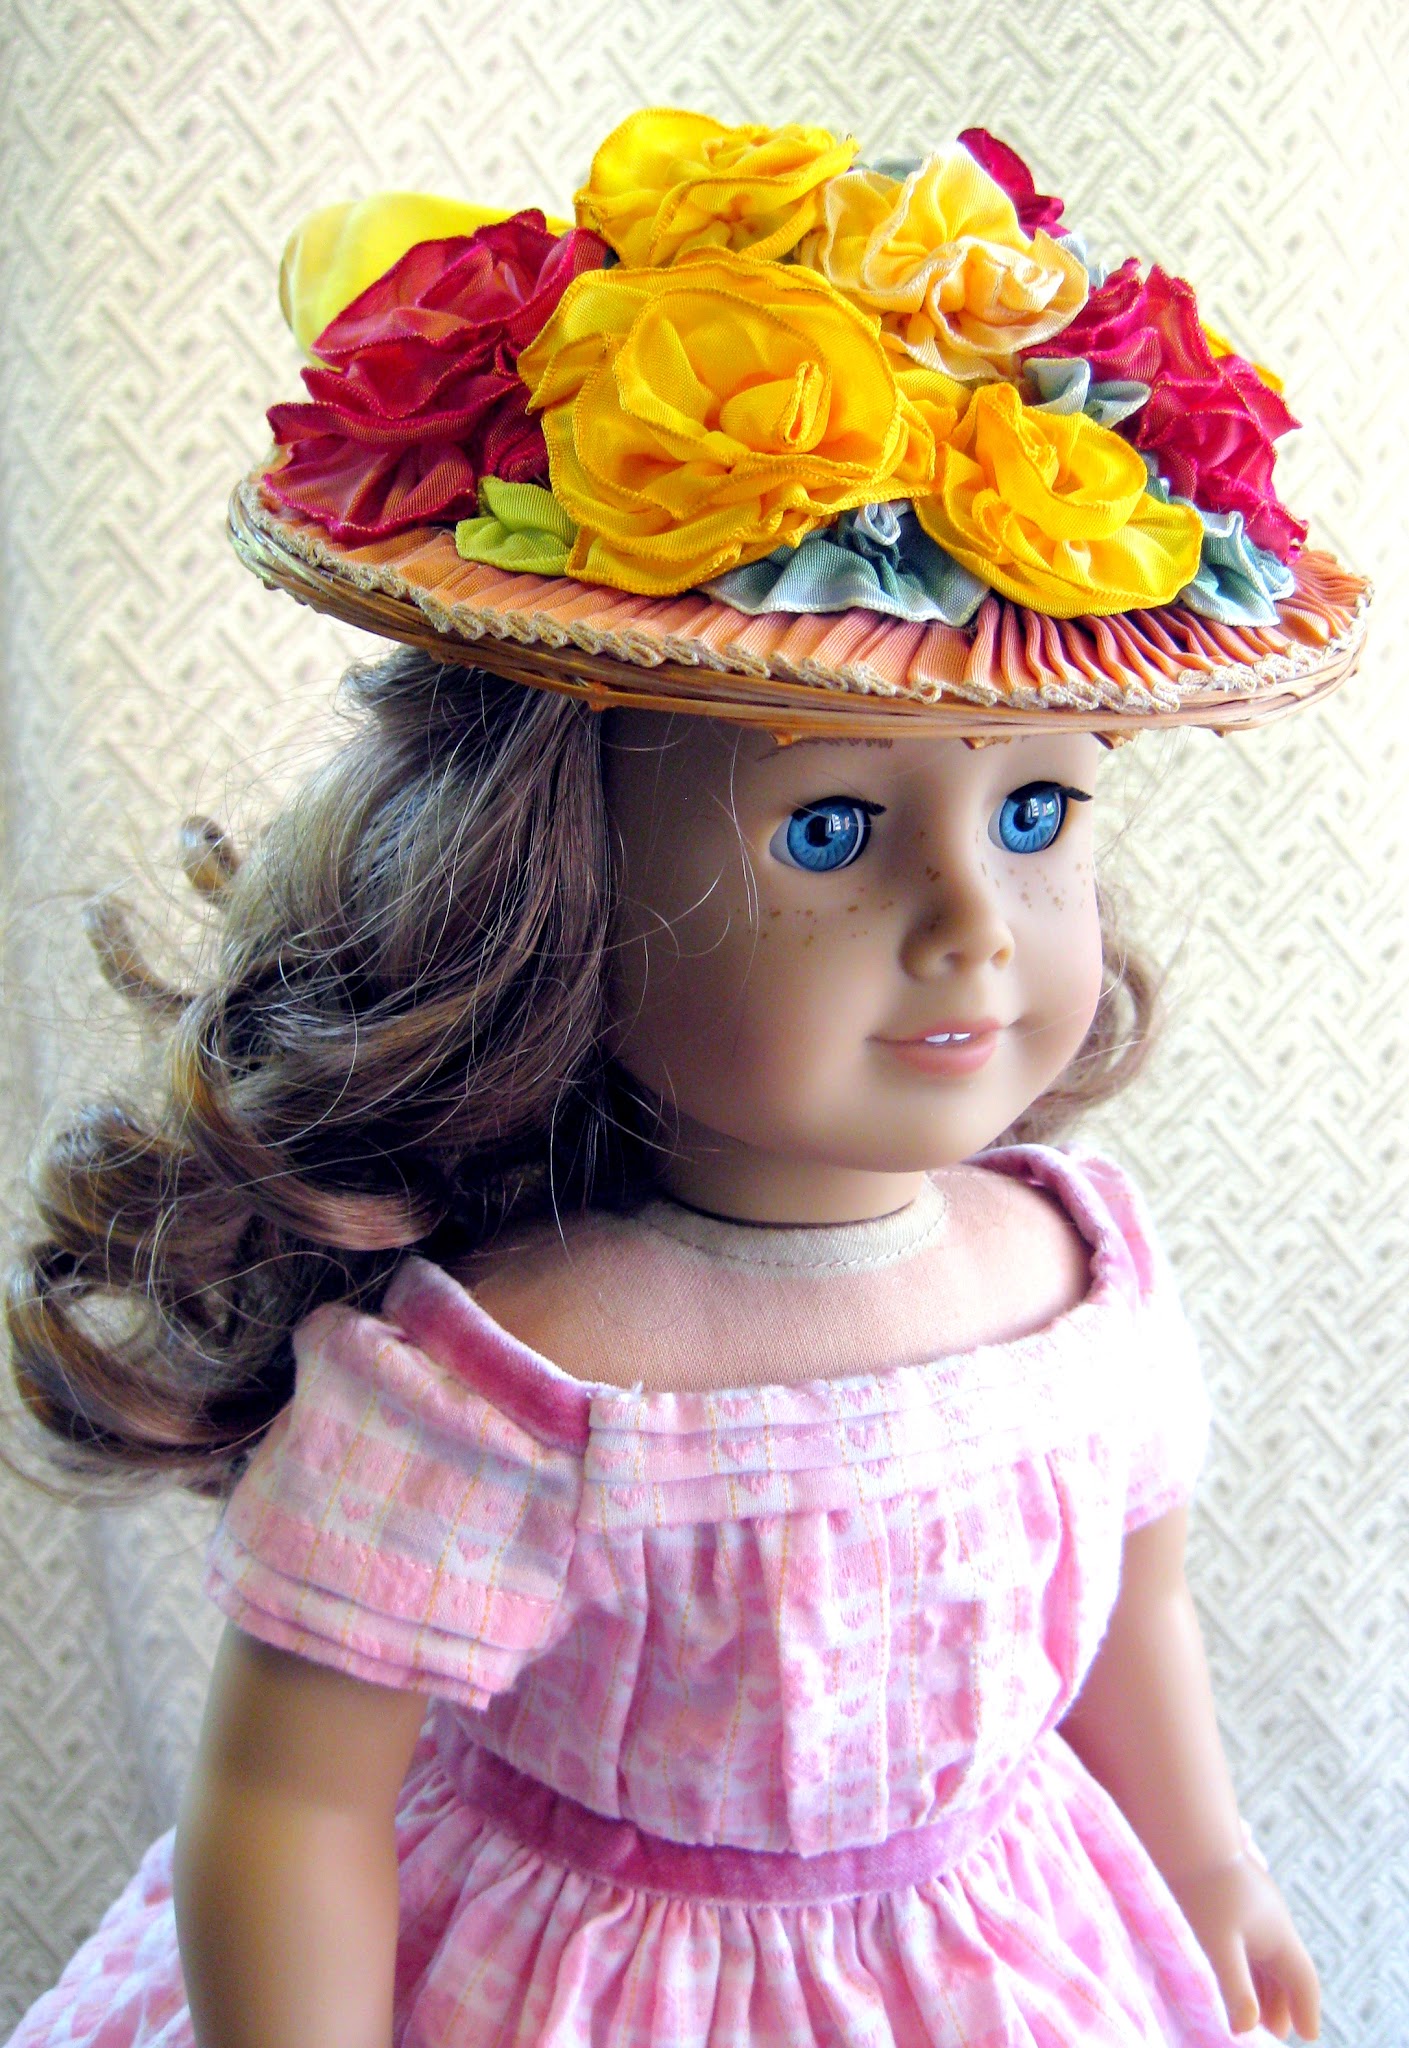 An American Girl doll in a pink dress wears a straw hat covered in wire-ribbon roses